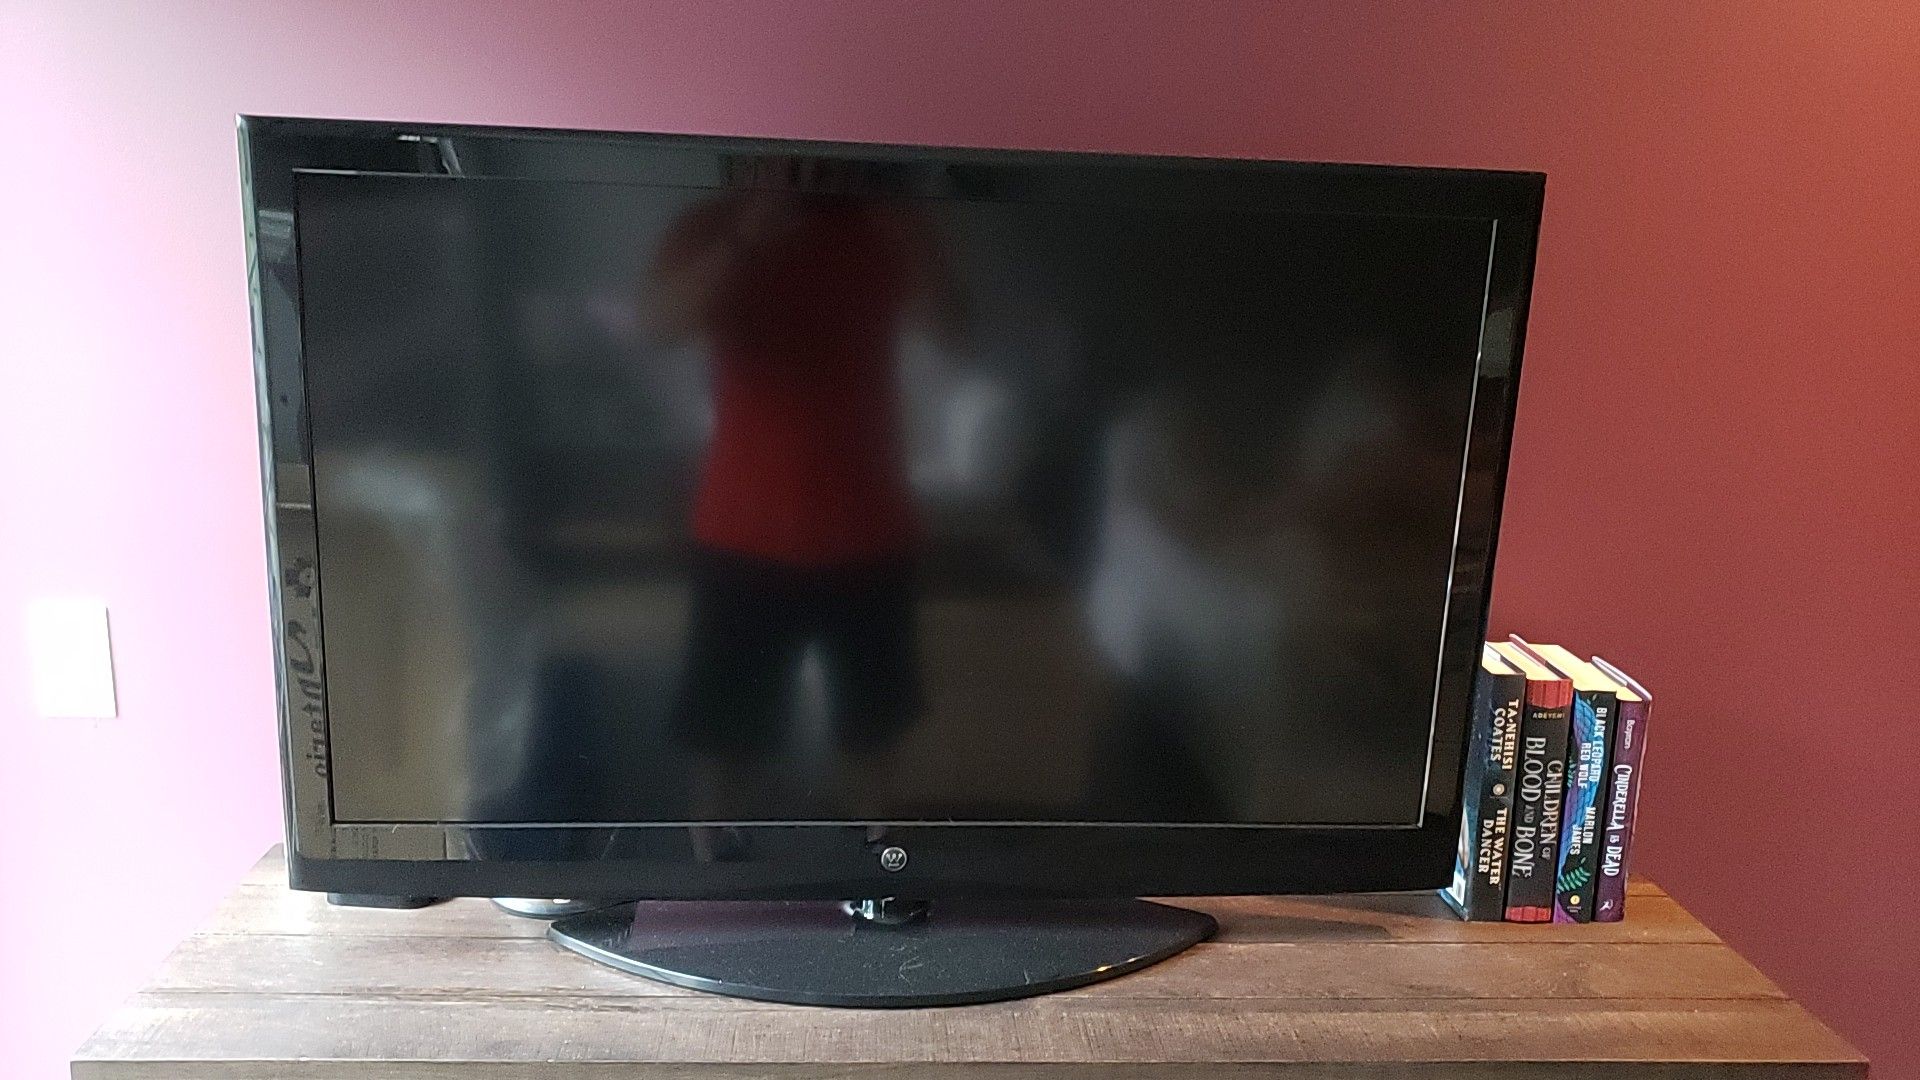 42" TV. Works but needs sound bar for audio